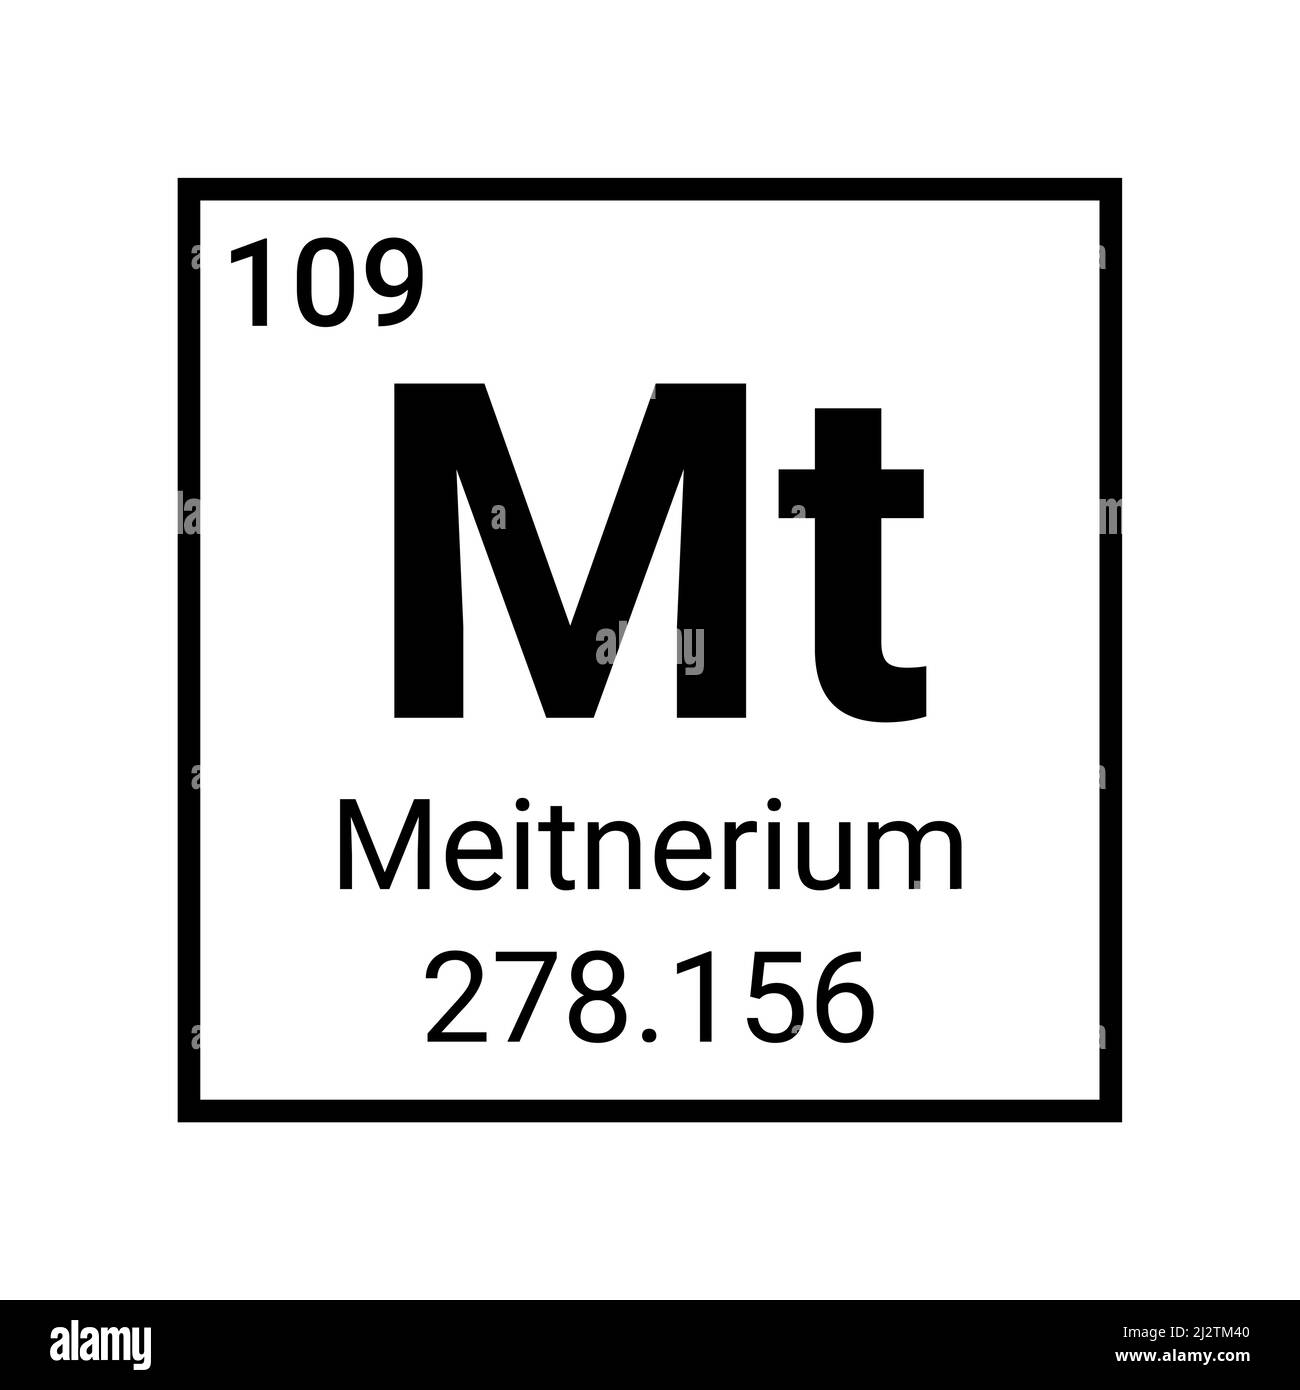 Meitnerium chemical element symbol science atom periodic sign Stock Vector